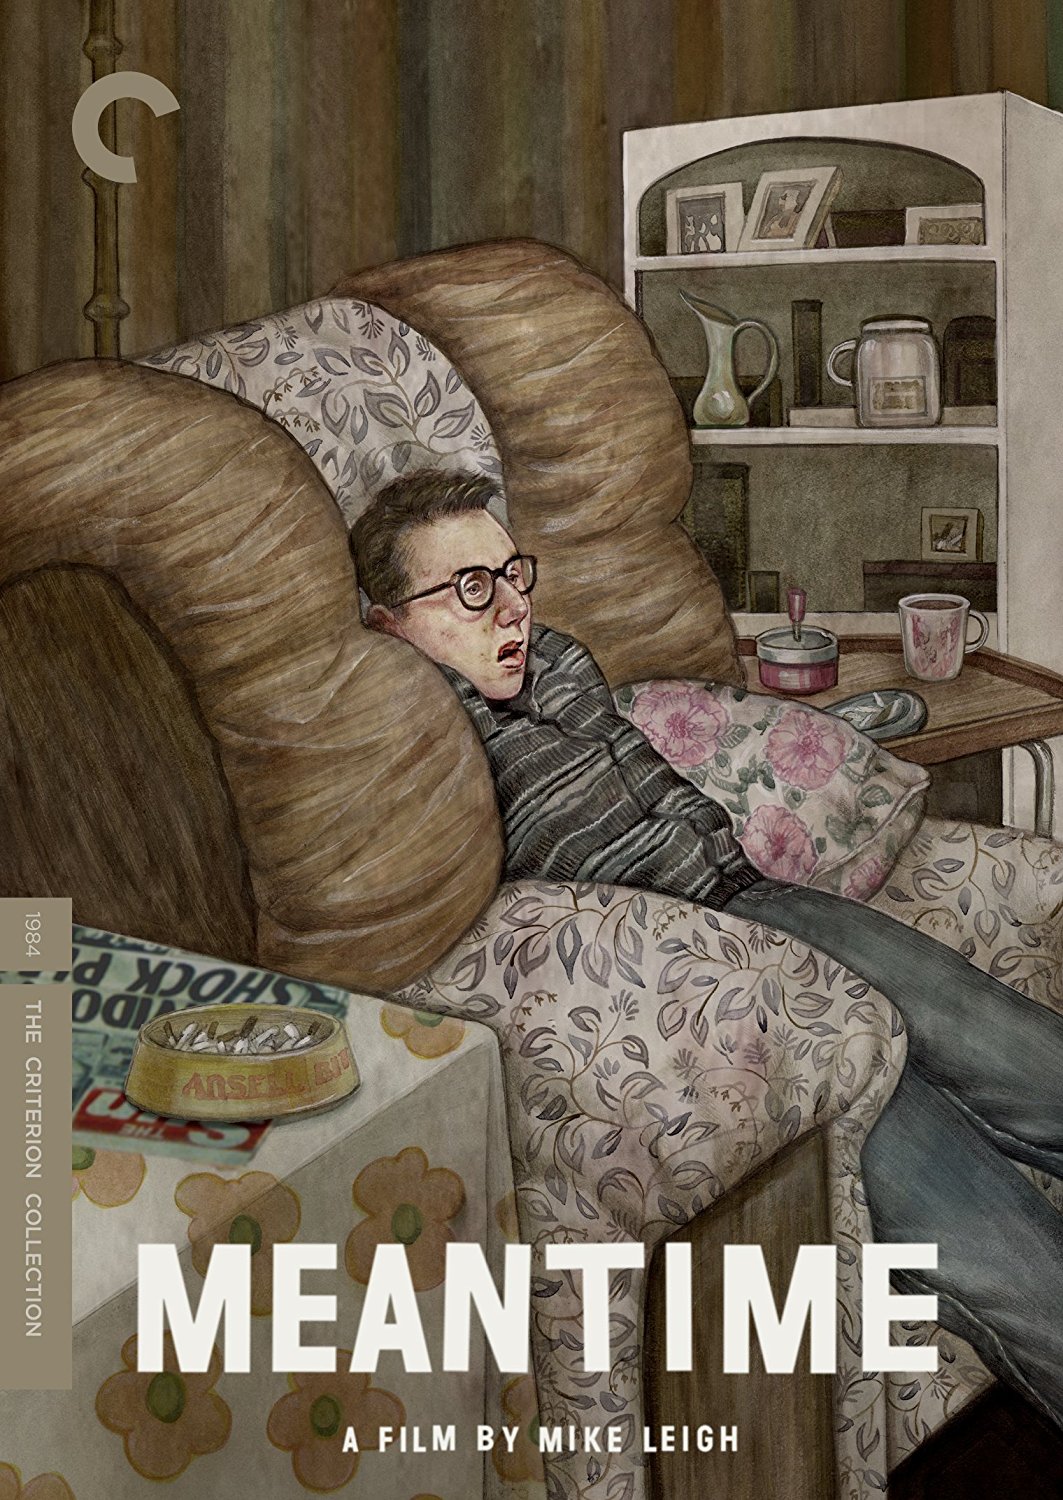 Meantime (1983) starring Marion Bailey on DVD on DVD